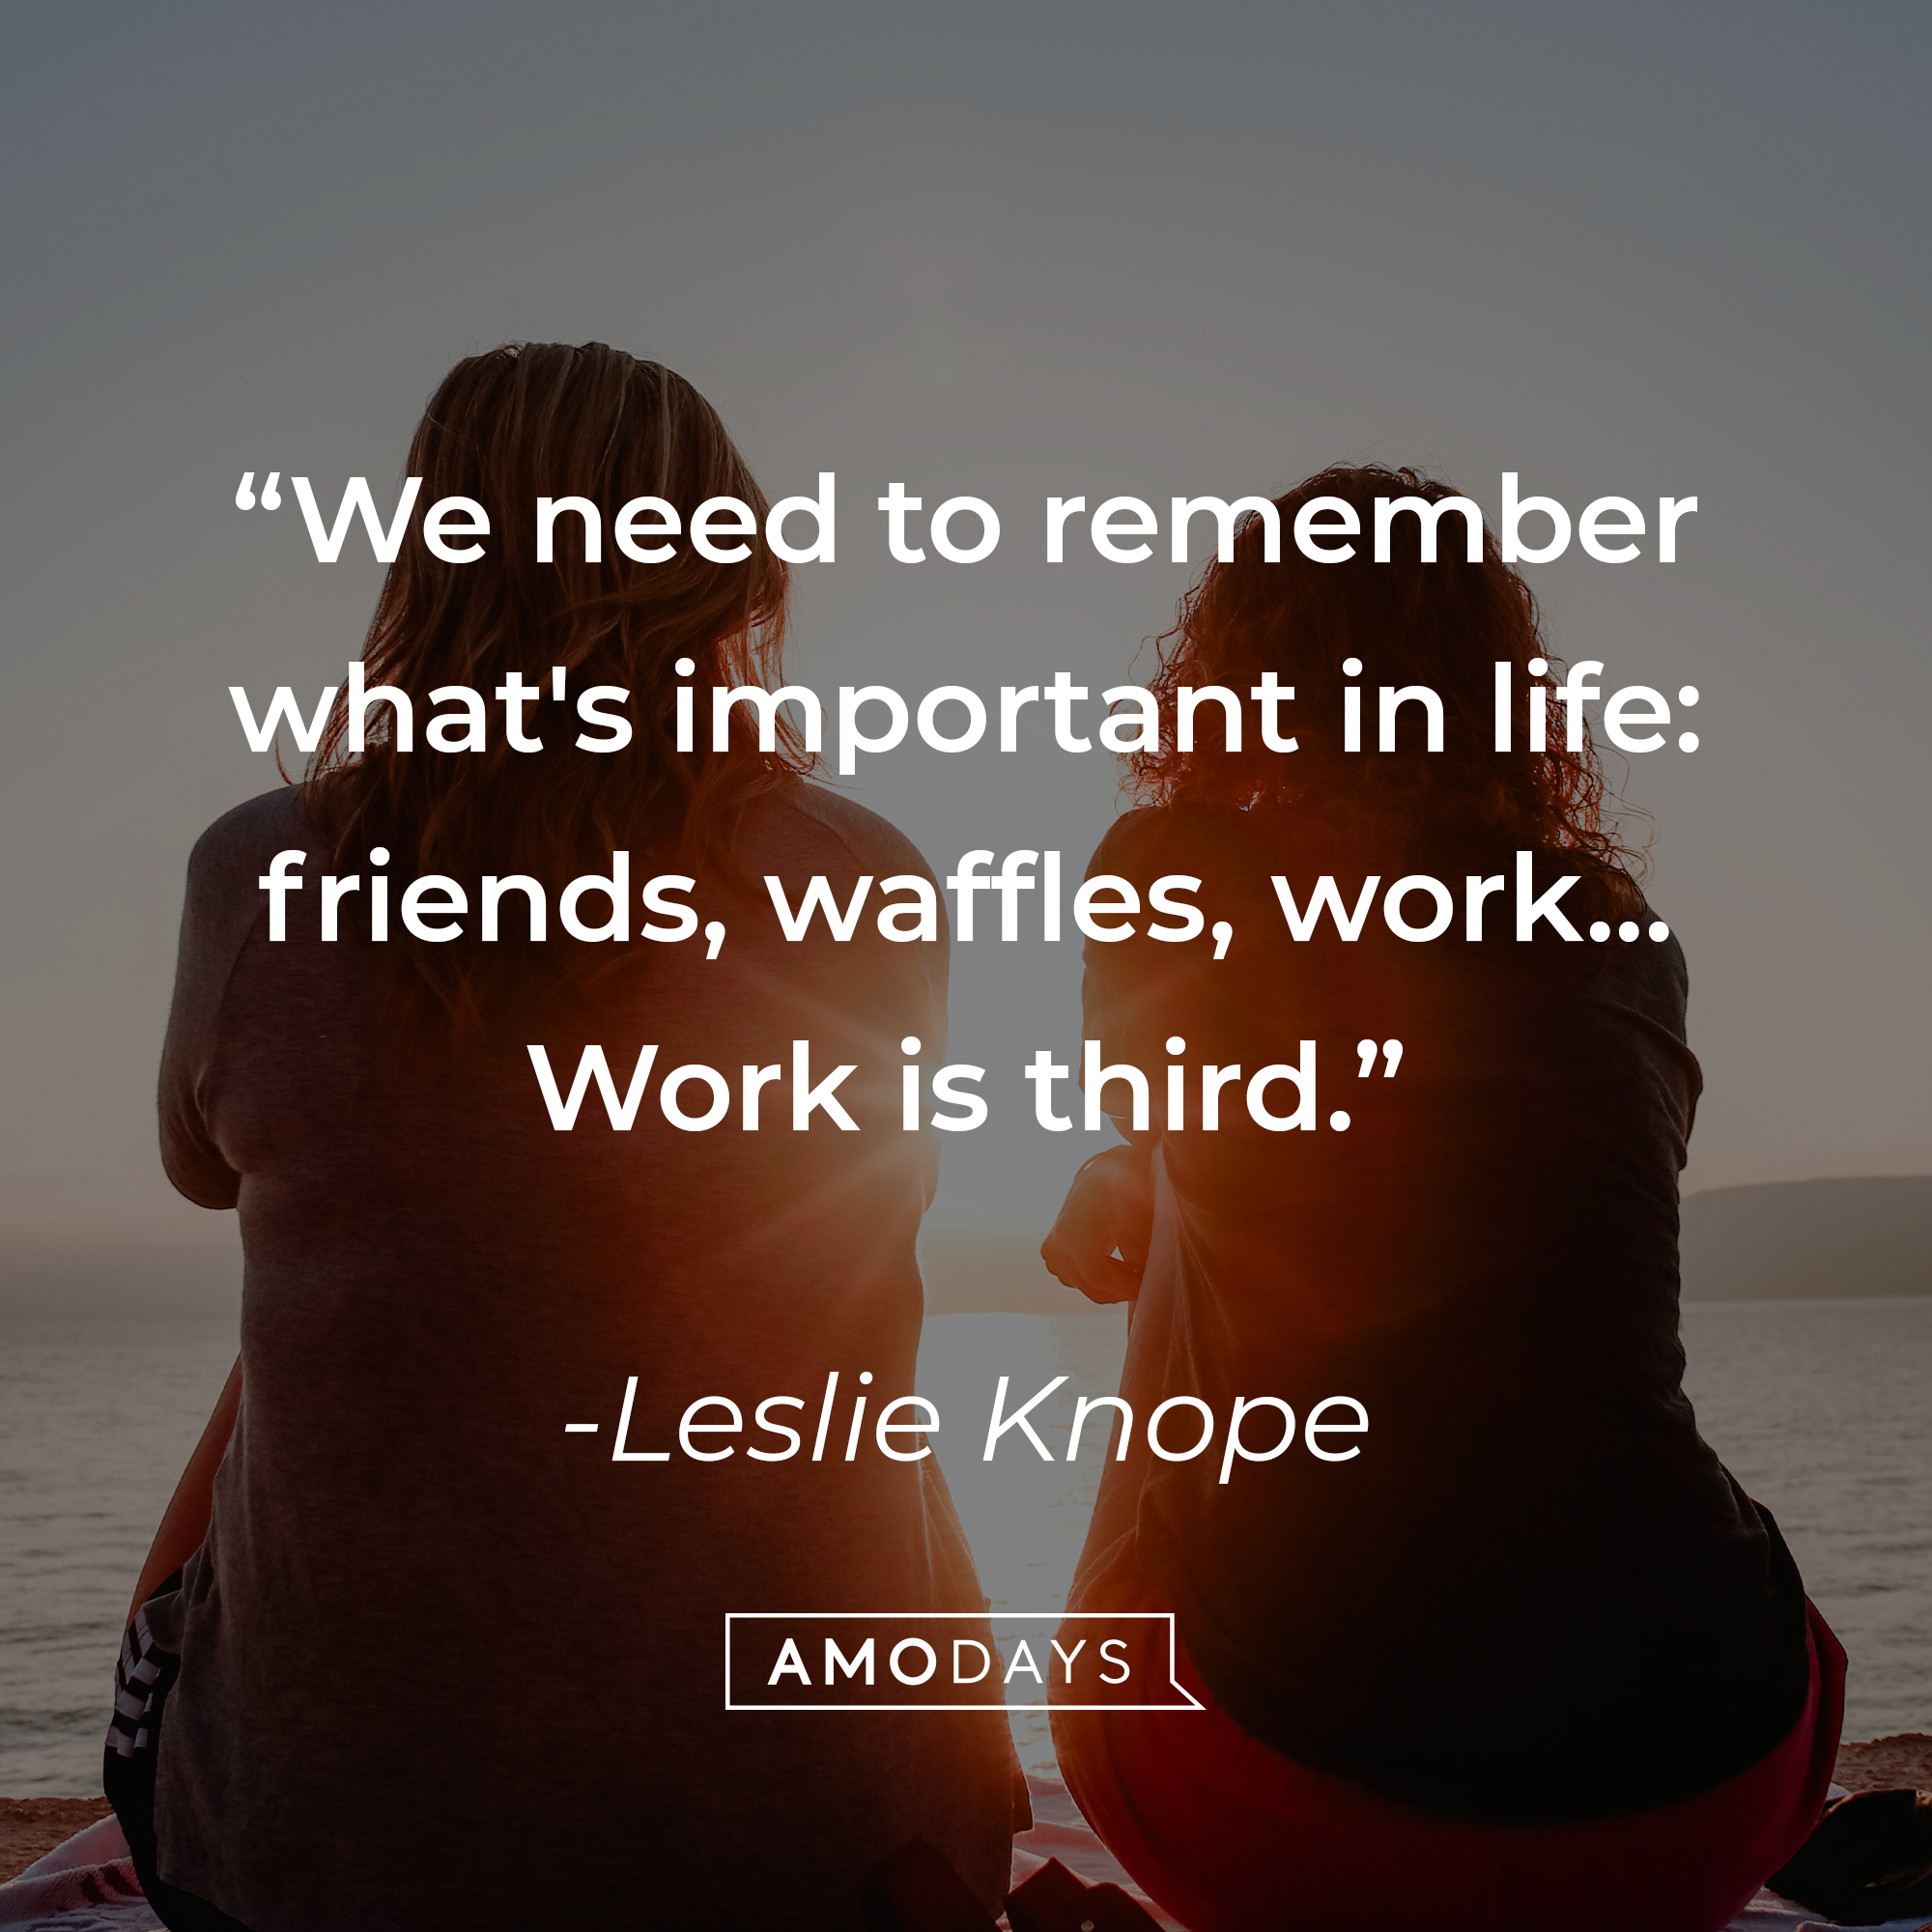 Leslie Knope's quote:  "We need to remember what's important in life: friends, waffles, work... Work is third." | Source: Unsplash